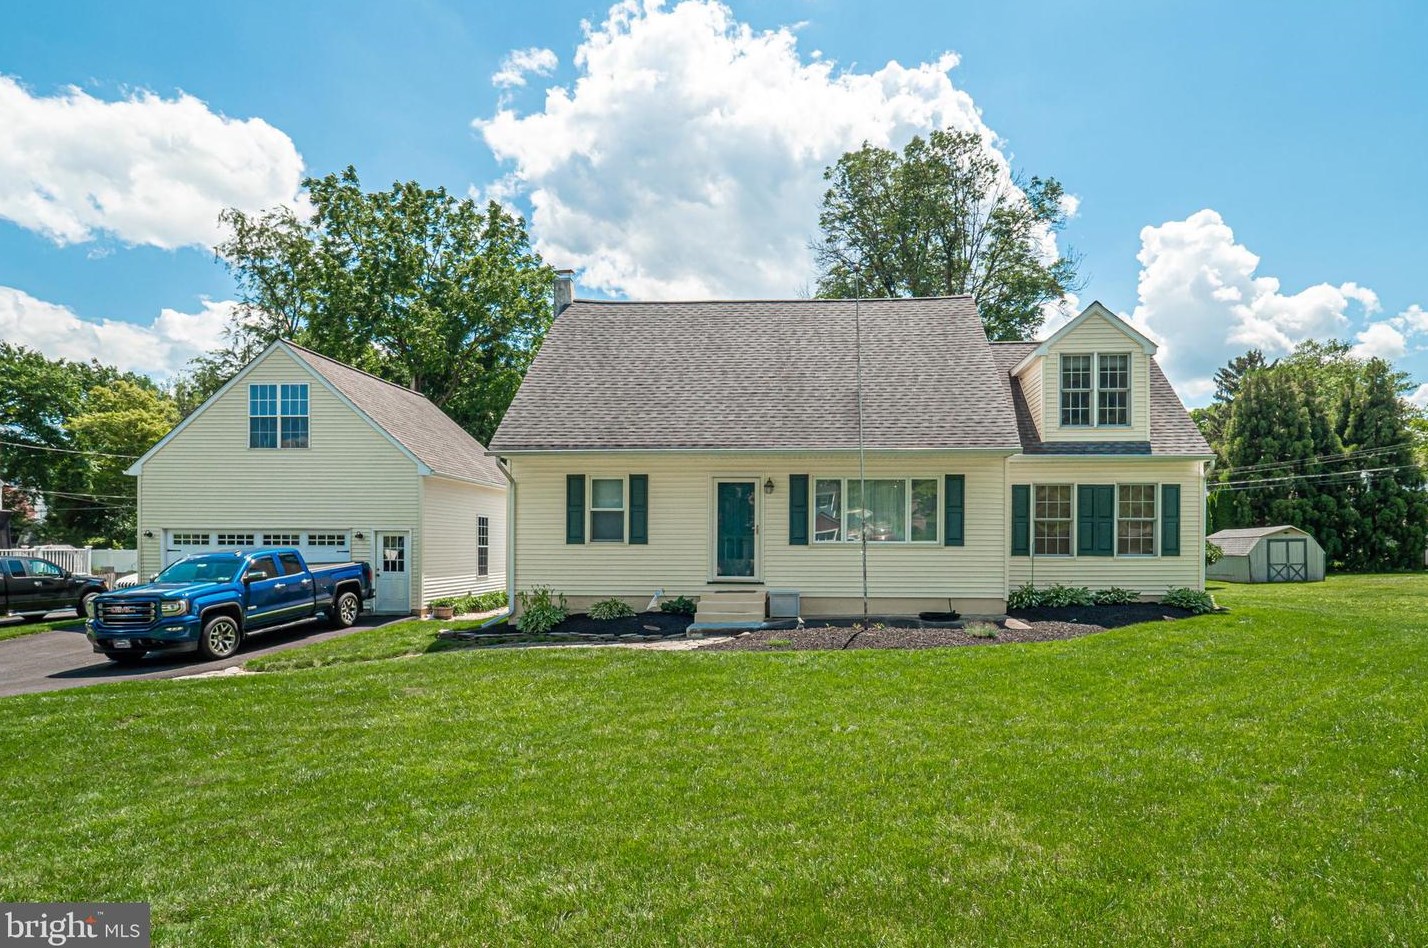 204 Seal Ln, West Chester, PA 19380